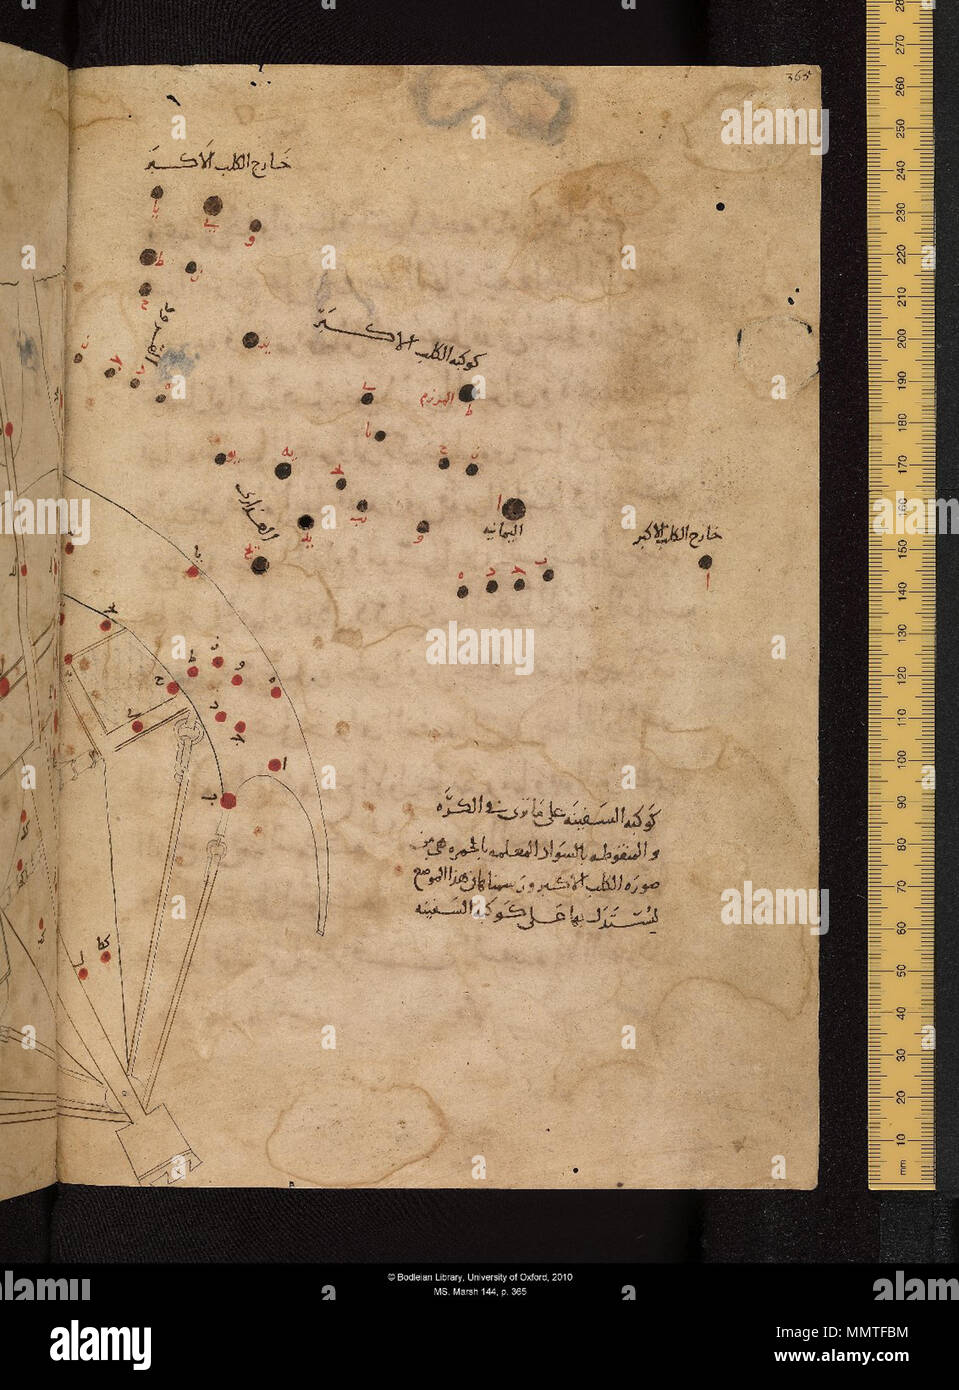 . English: Argo navis (al-safinah), the ship. (Constellations of the southern hemisphere). From Al-Sufi's Book of the Fixed Stars (Kitāb Ṣuwar al-kawākib (al-thābitah)), a revision of Ptolemy's Almagest with Arabic star names and drawings of the constellations. Dated 1009-10 (A.H. 400). Shelfmark: MS. Marsh 144.  . between 1009 and 1010.   Abd al-Rahman al-Sufi  (903–986)     Alternative names Azophi, ?????: ????????? ????  Description Persian astronomer, translator, mathematician and astrologer  Date of birth/death 12 December 903 30 May 986  Location of birth/death Rey Shiraz  Work location  Stock Photo